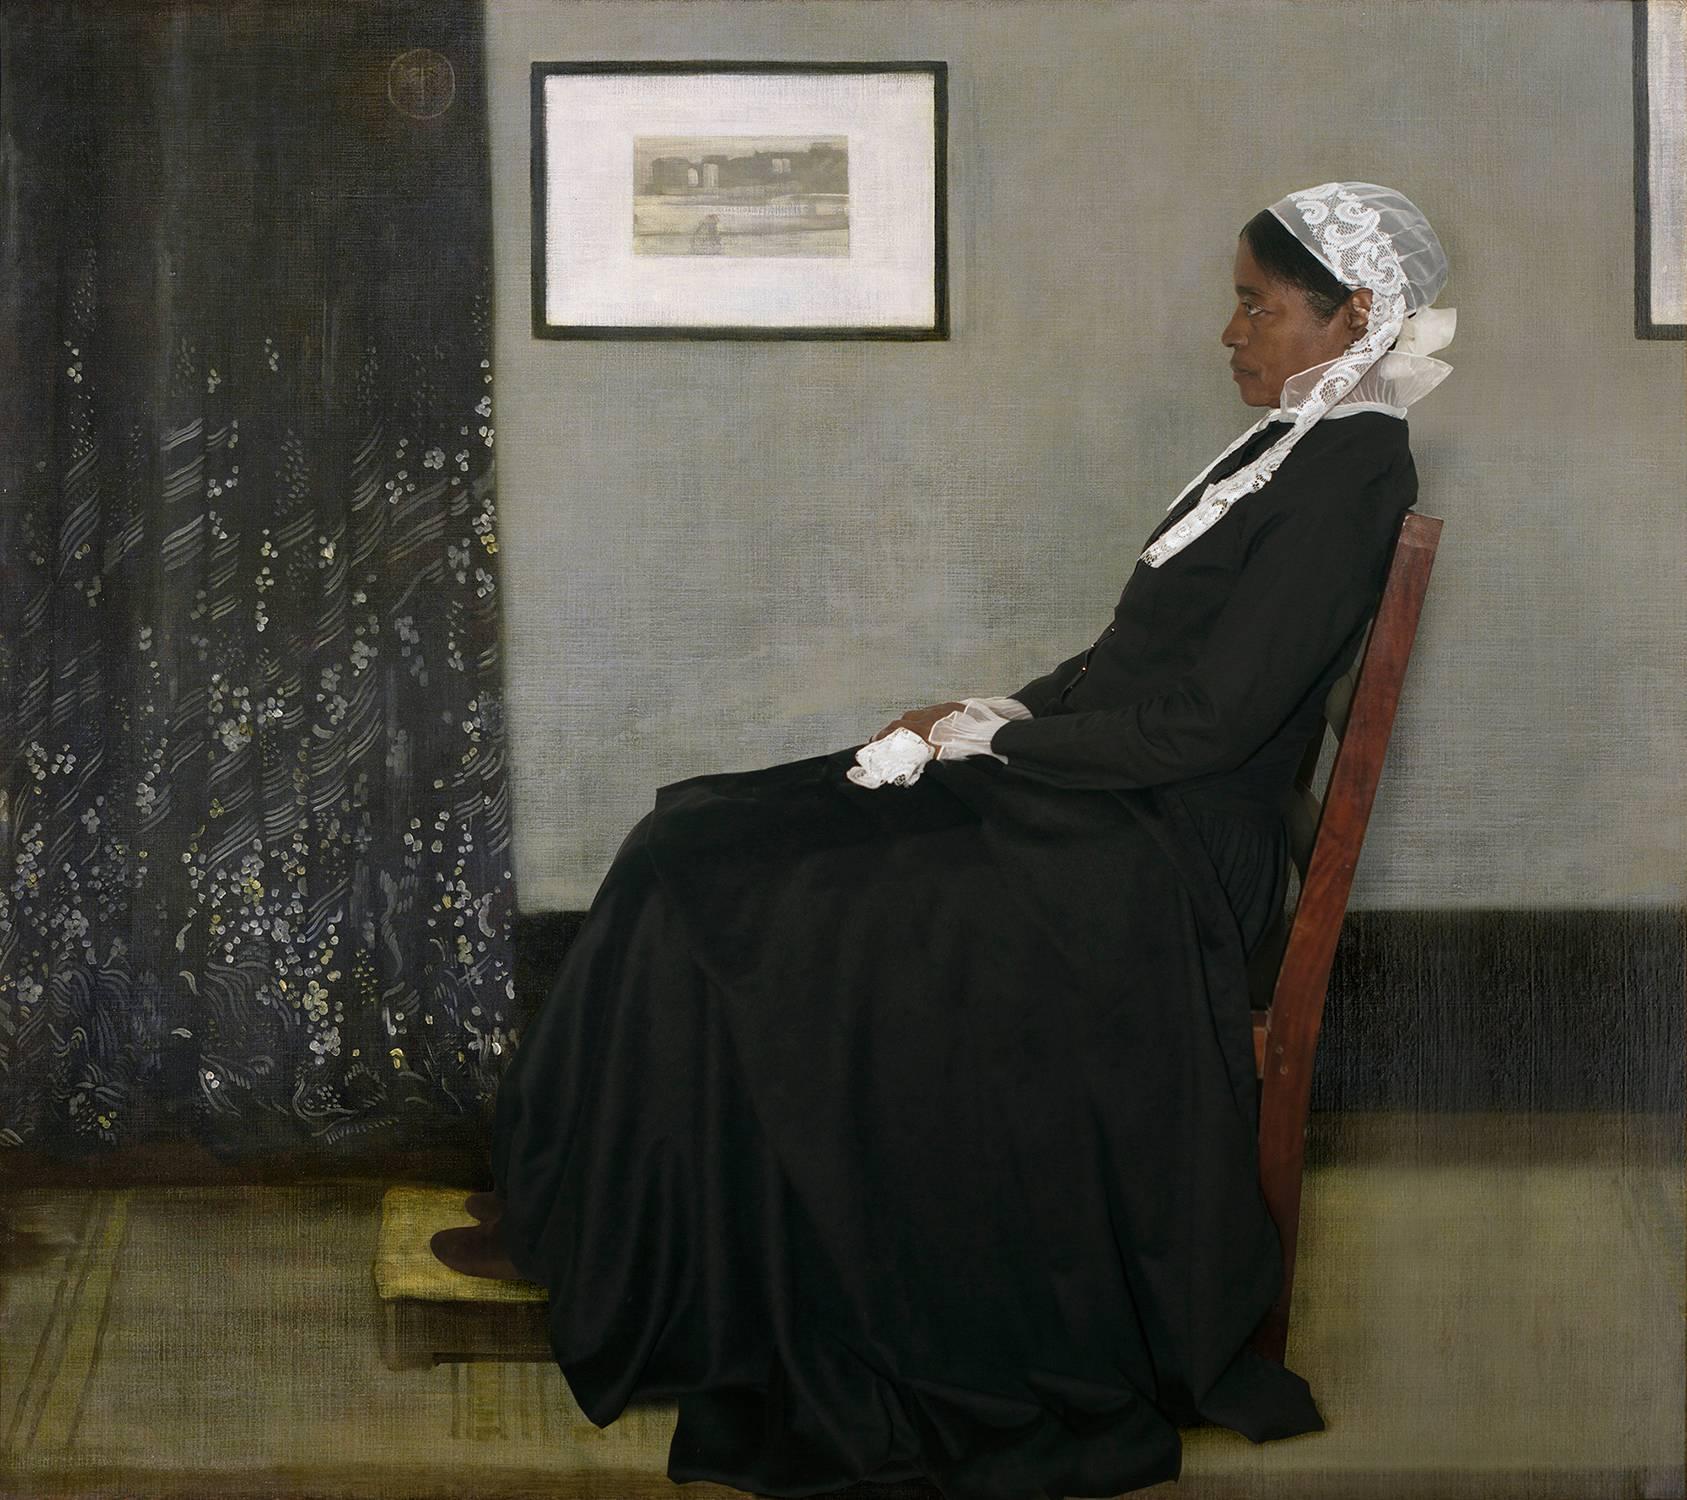 E2 - Kleinveld & Julien Figurative Photograph - Ode to Whistler's Arrangement in Grey and Black No. 1